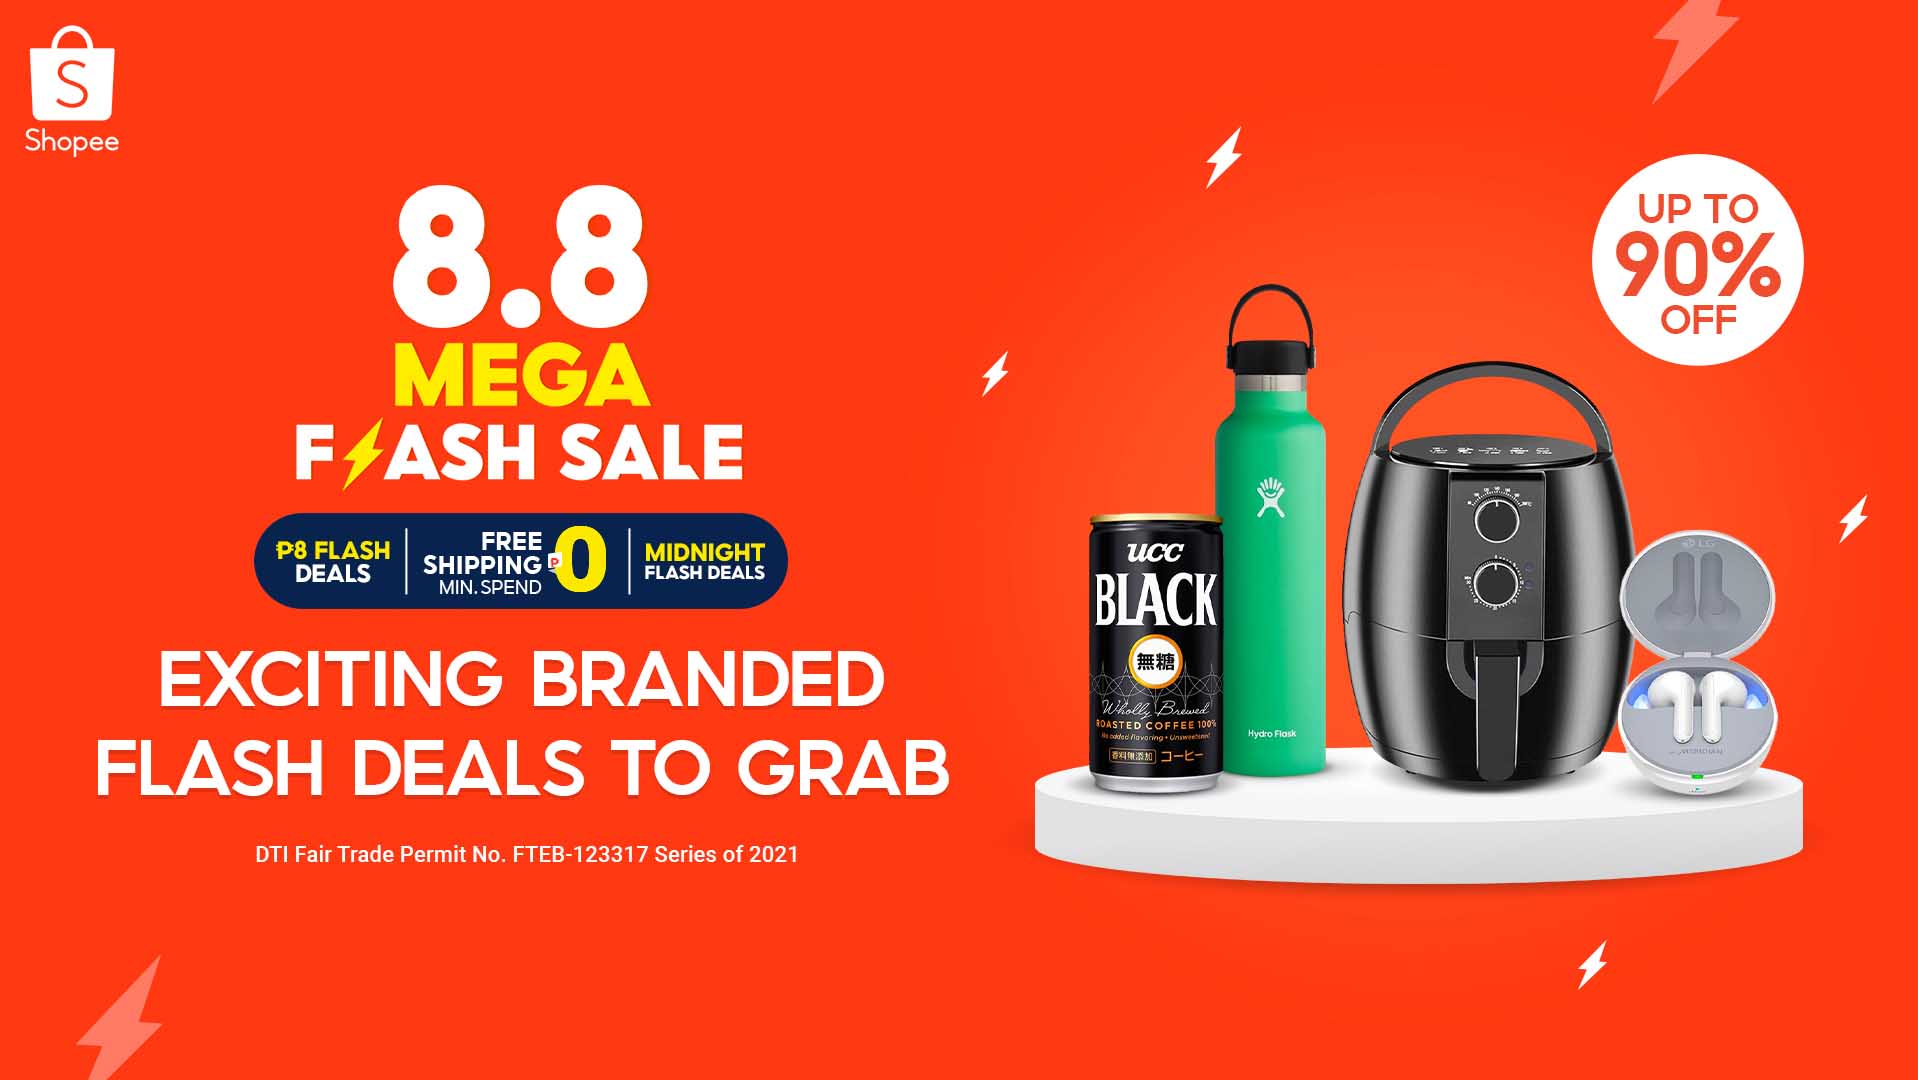 Check Out the Huge Price Drops from Your Favorite Brands at the Shopee 8.8 Mega Flash Sale